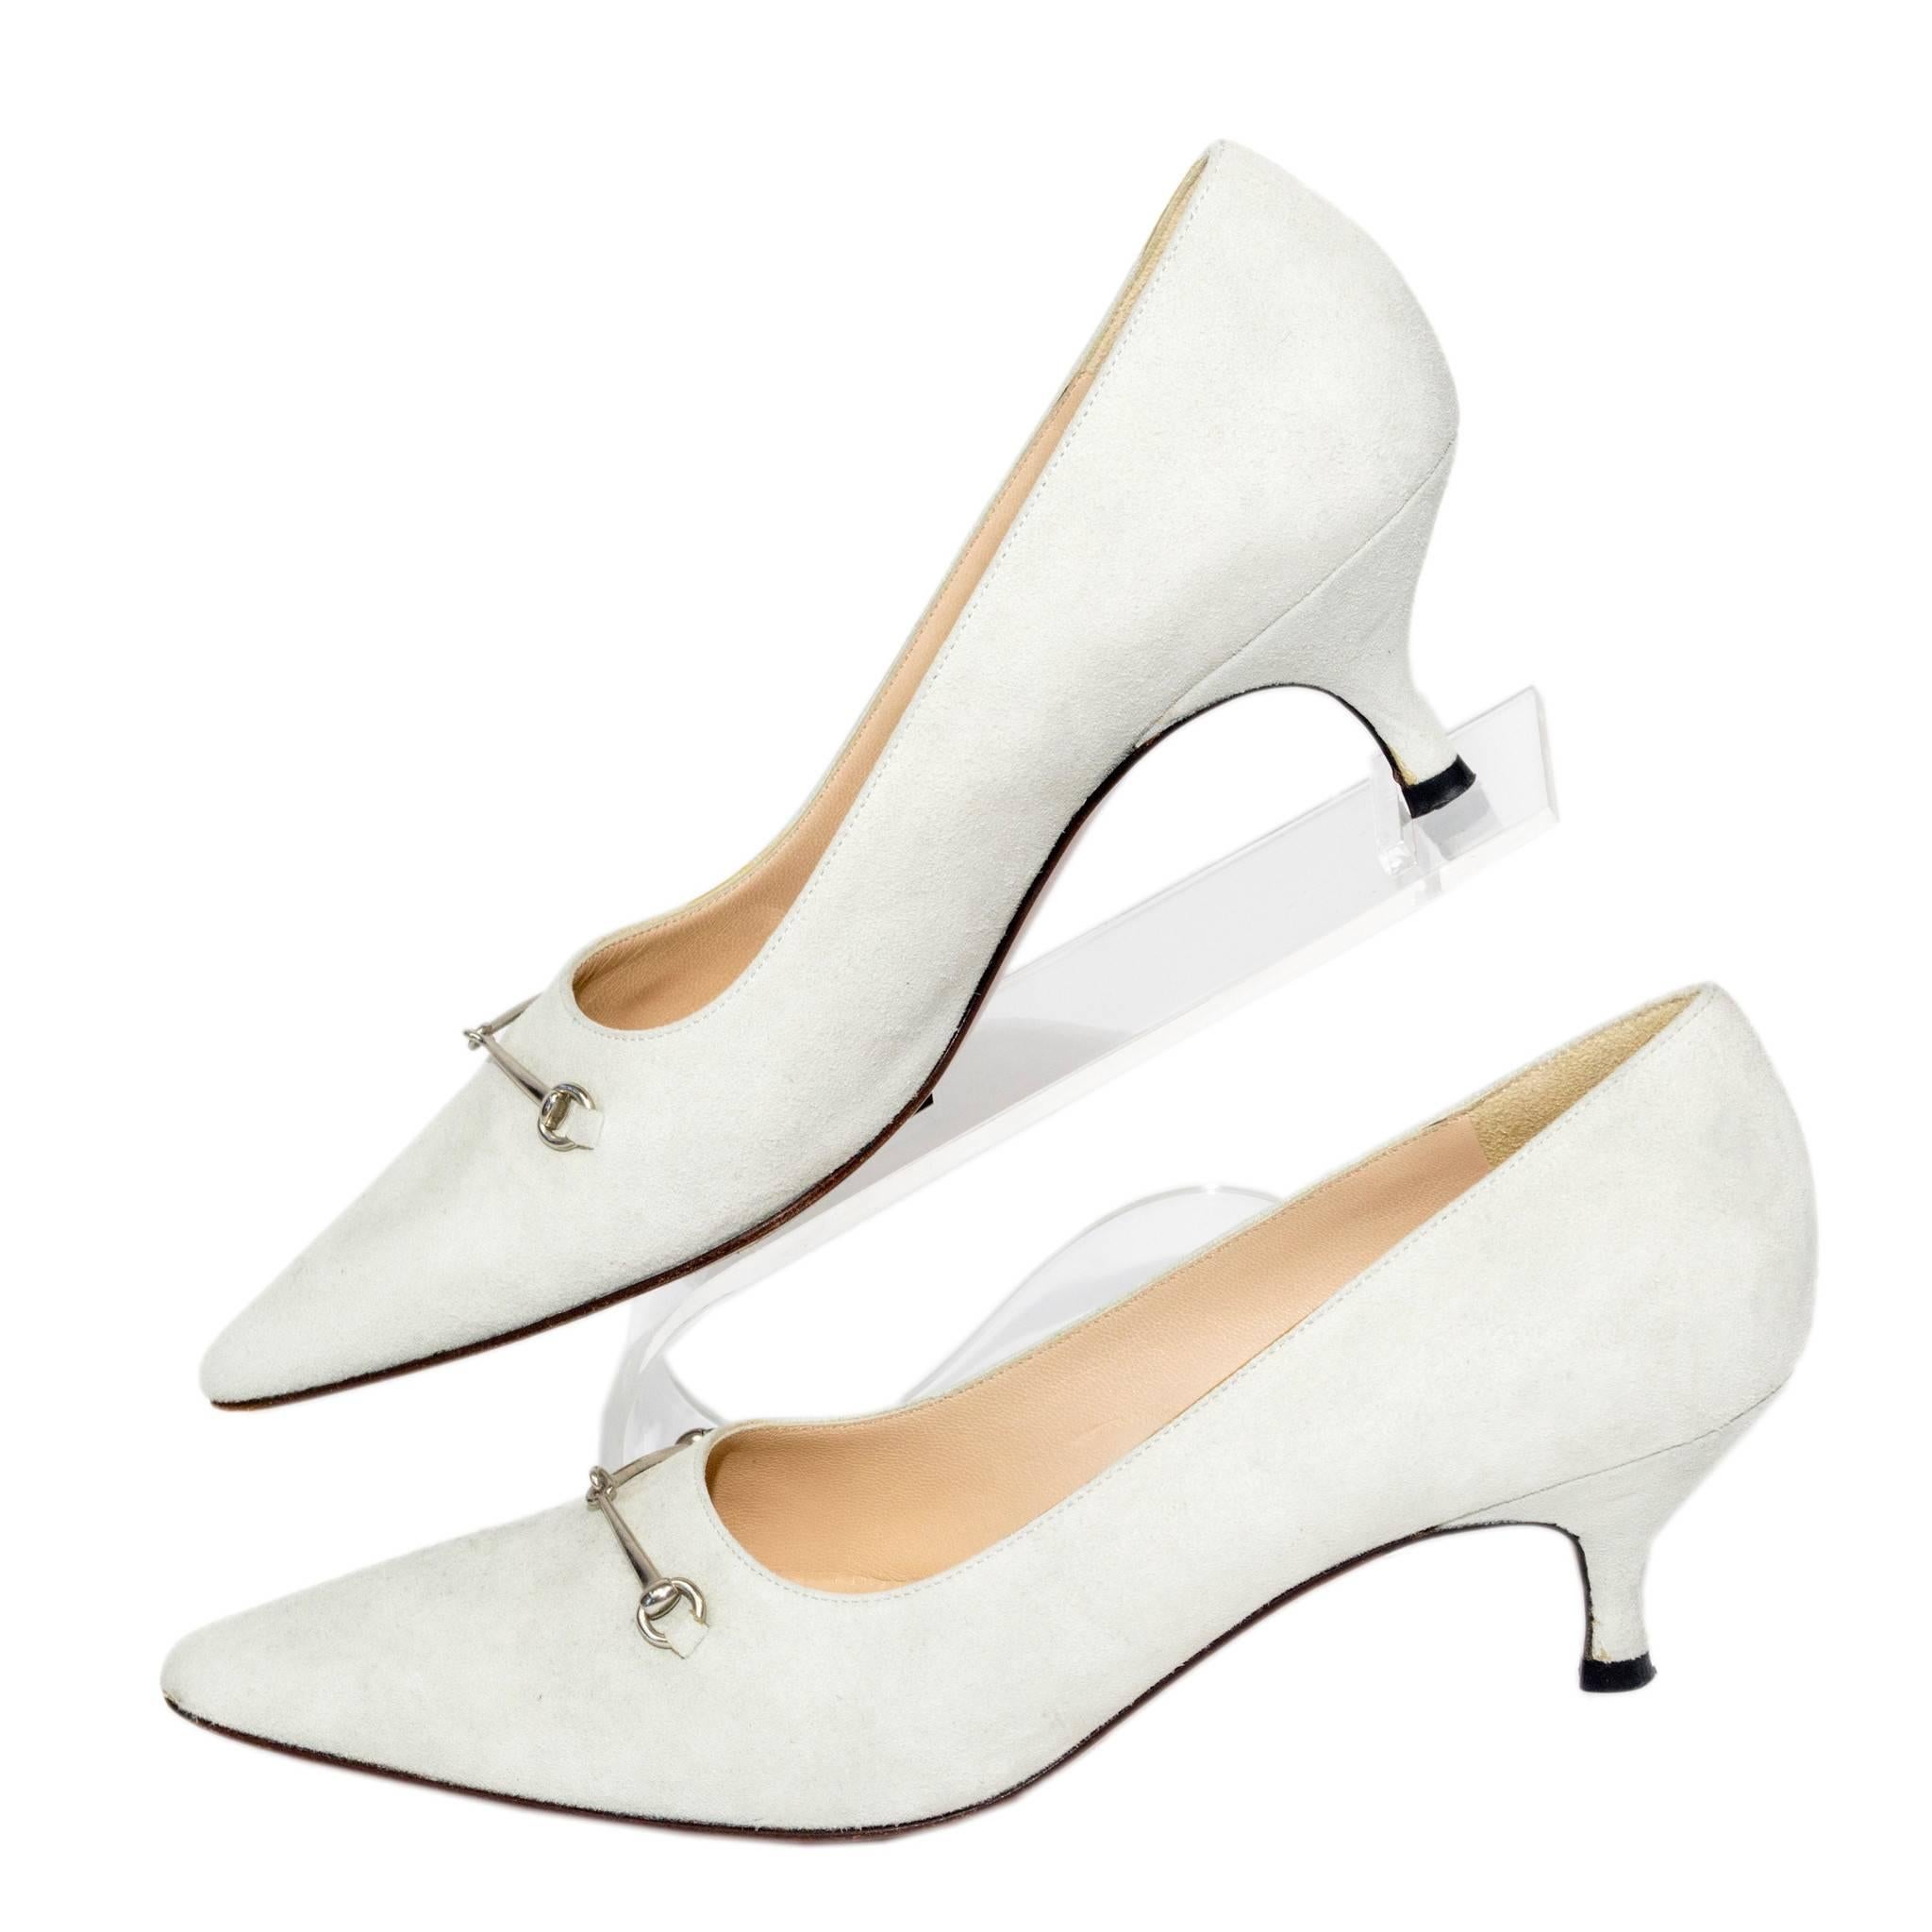 Gucci ivory colored suede kitten Low heels with silver horsebit

Size Marked: 7.5
1 Inch Heel

Good Vintage Condition:Please remember all clothes are previously owned and gently worn unless otherwise noted.